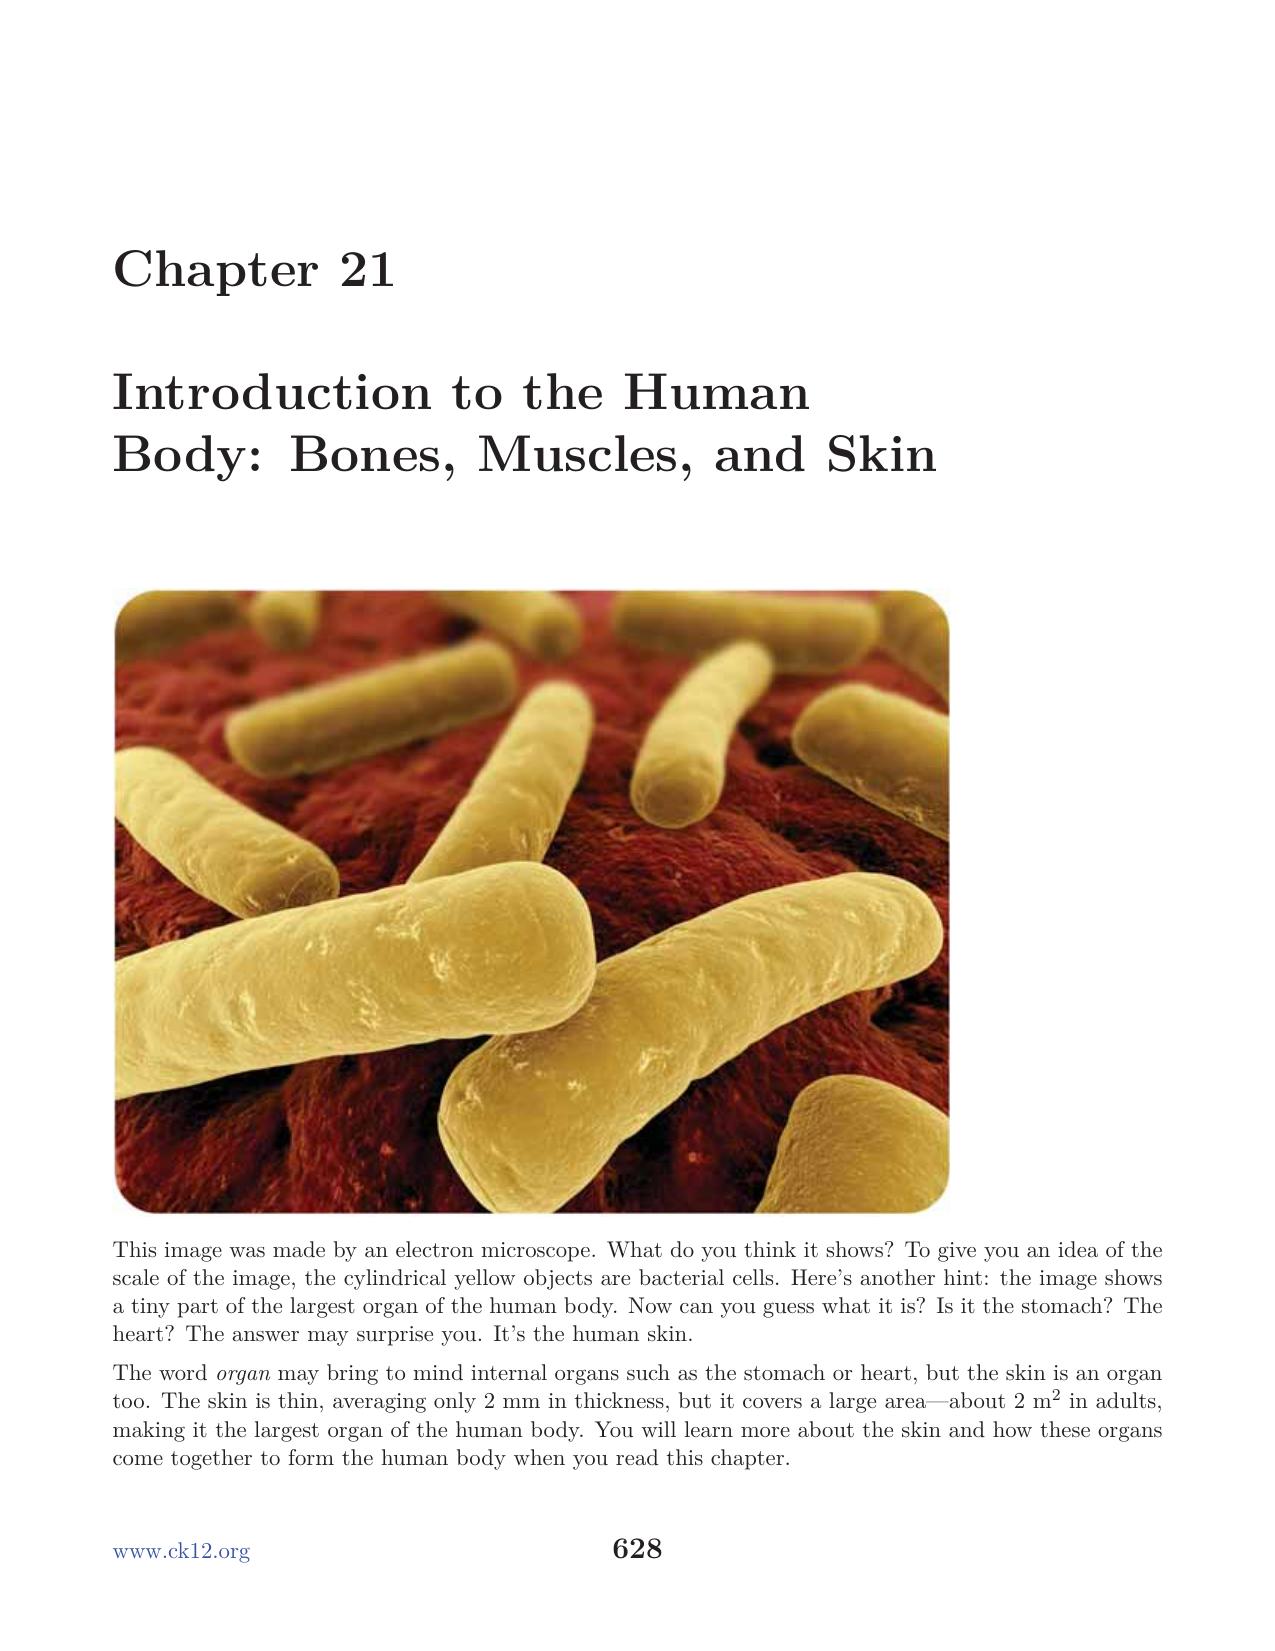 Biology Chapter21